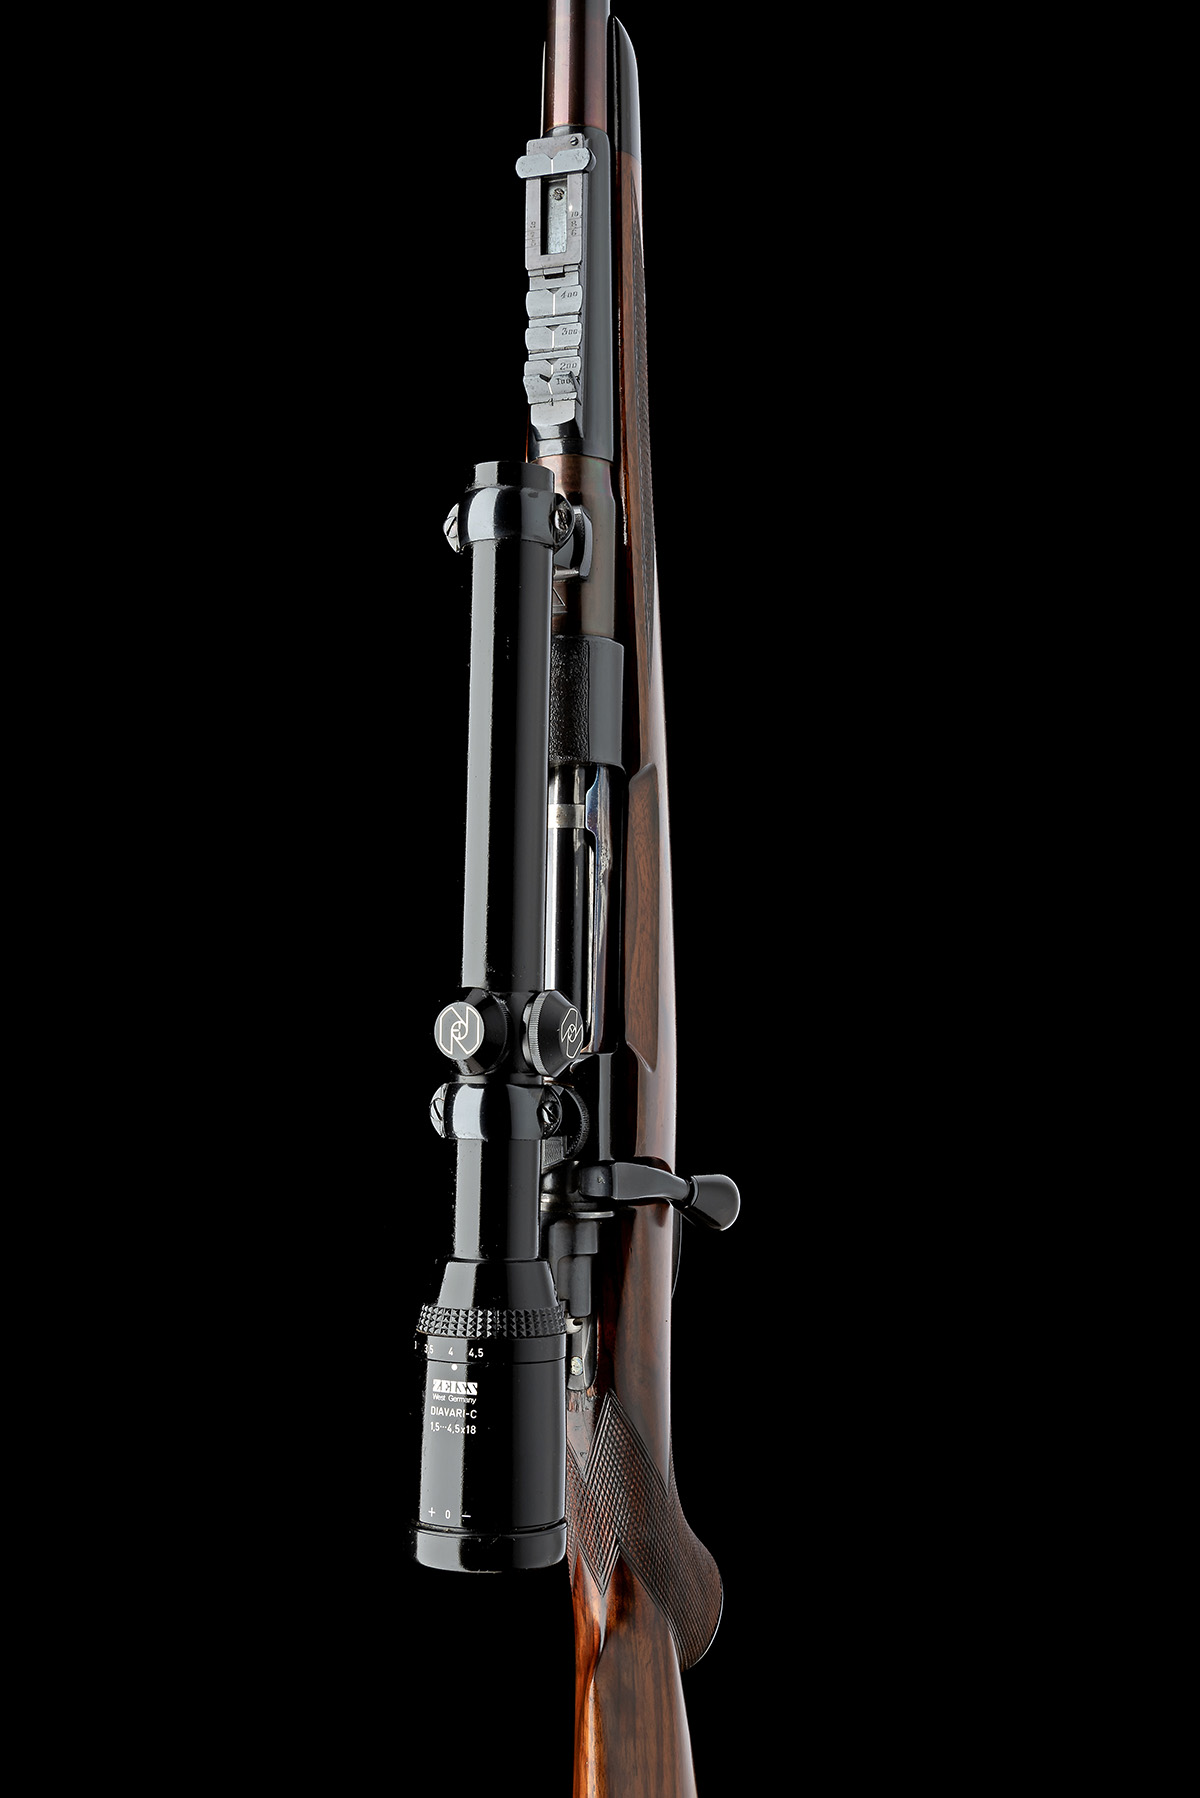 WESTLEY RICHARDS & CO. A .318 ACCELERATED EXPRESS BOLT-MAGAZINE SPORTING RIFLE, serial no. LT. - Image 4 of 4